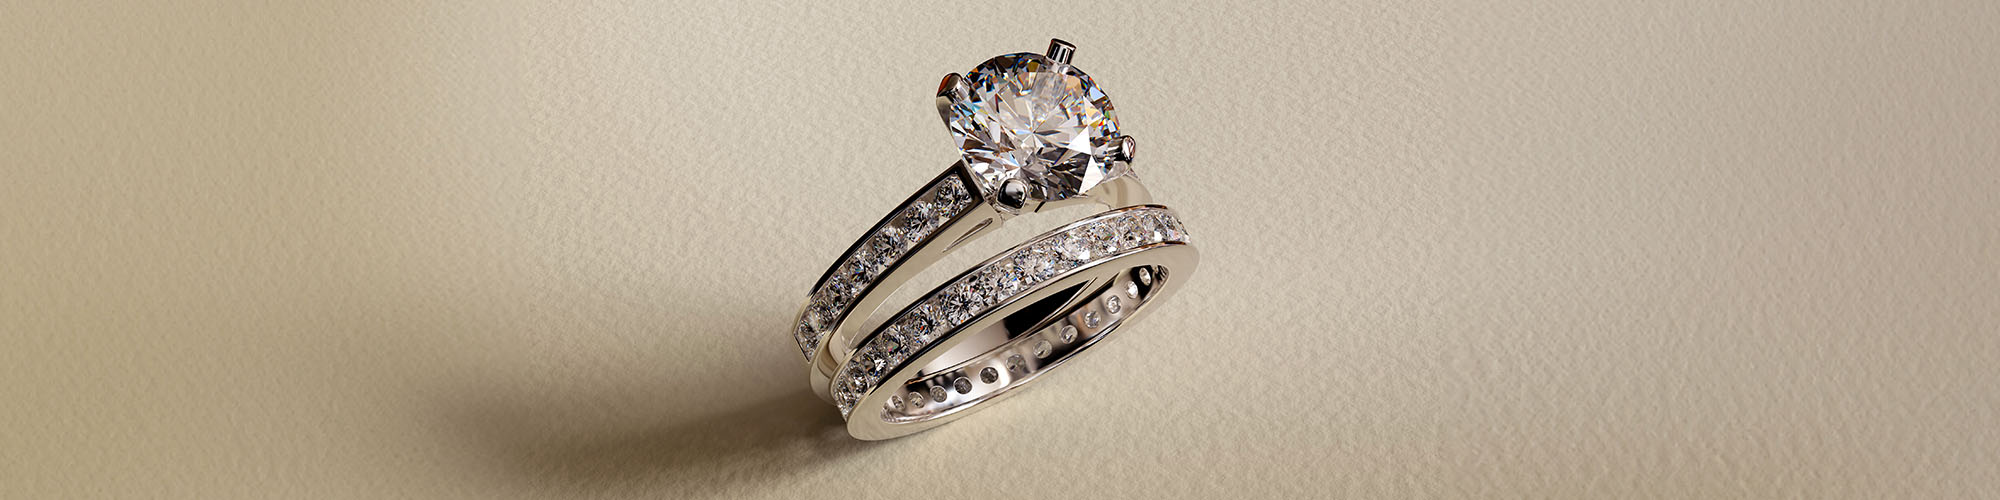 Channel Engagement Rings